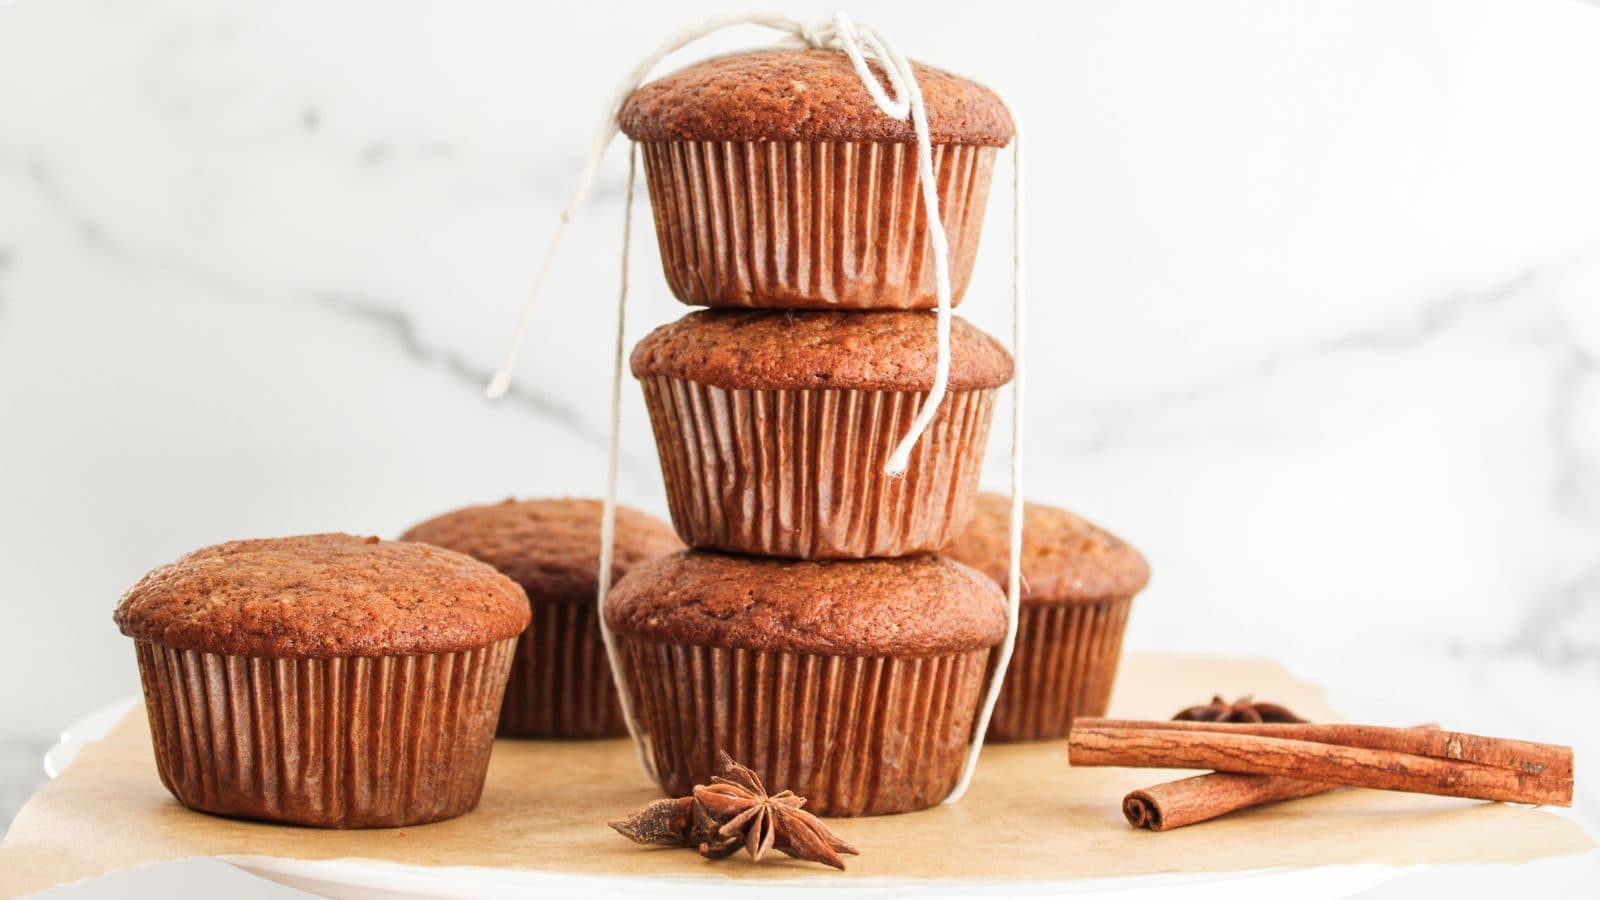 A stack of pumpkin spiced muffins on a plate.